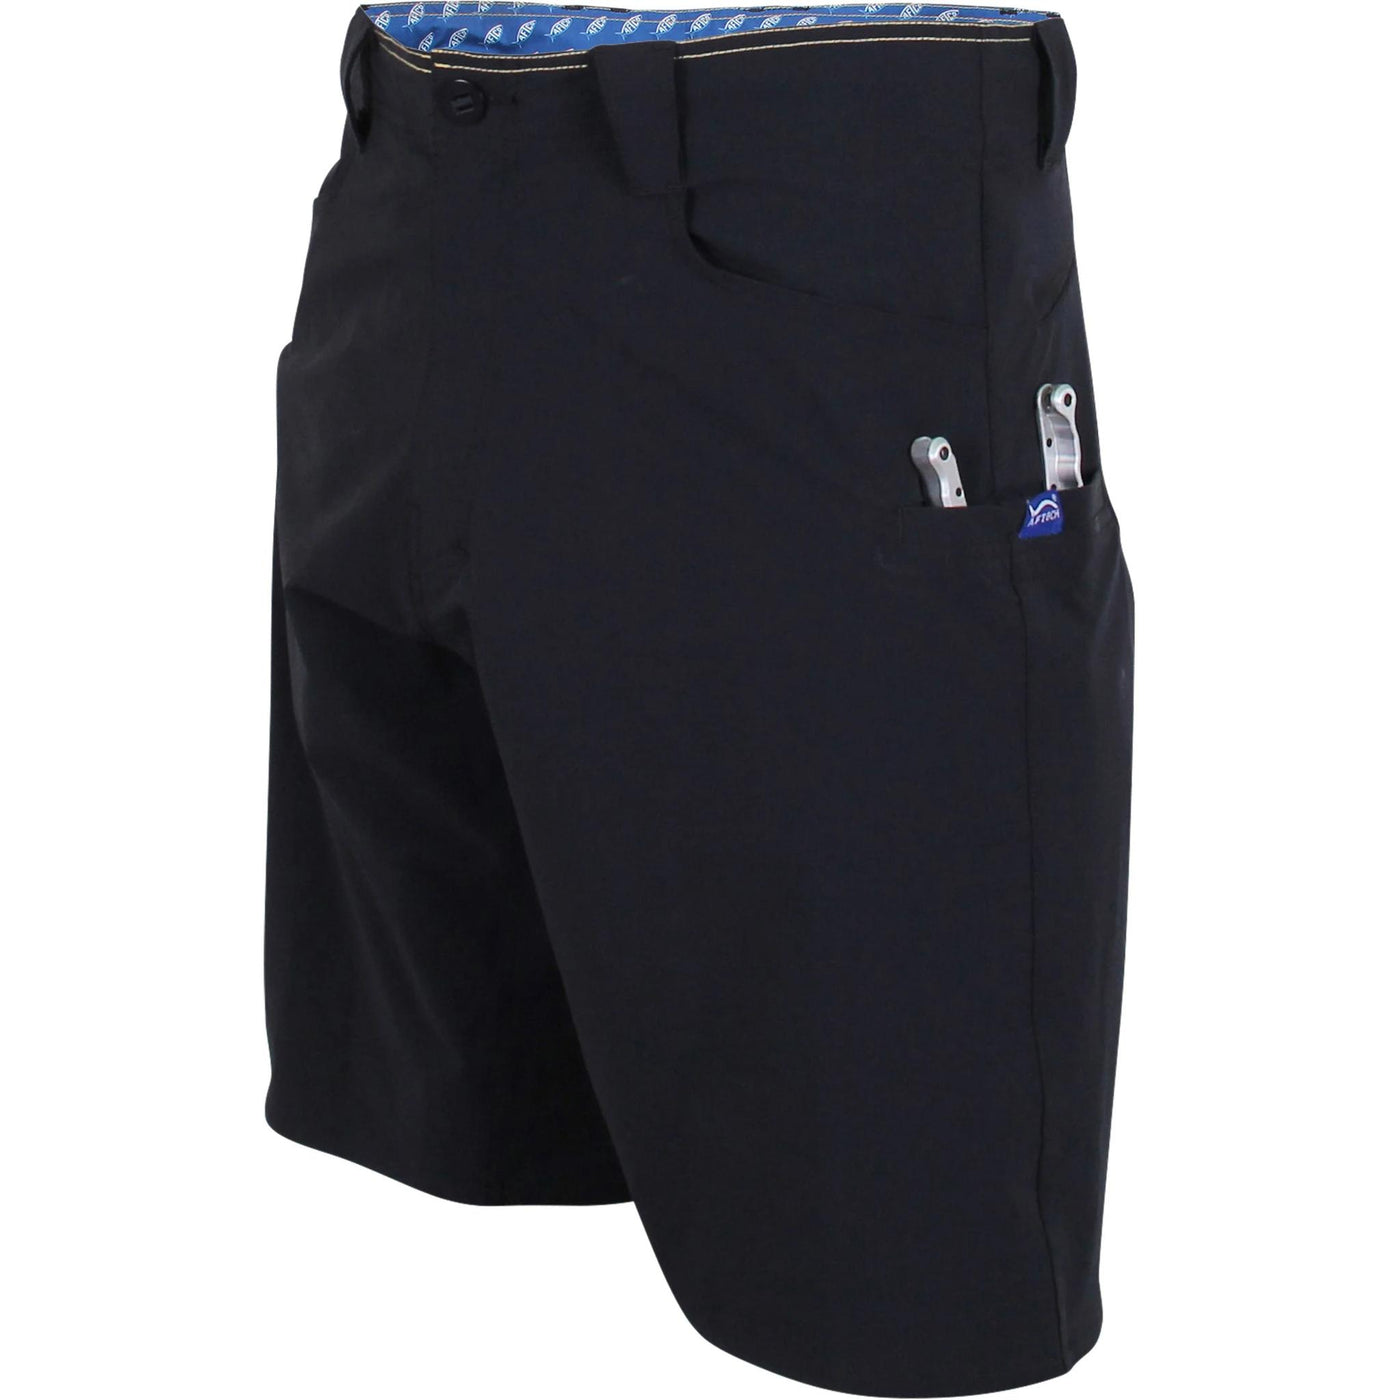 Aftco Overboard Submersible Shorts-MENS CLOTHING-Kevin's Fine Outdoor Gear & Apparel